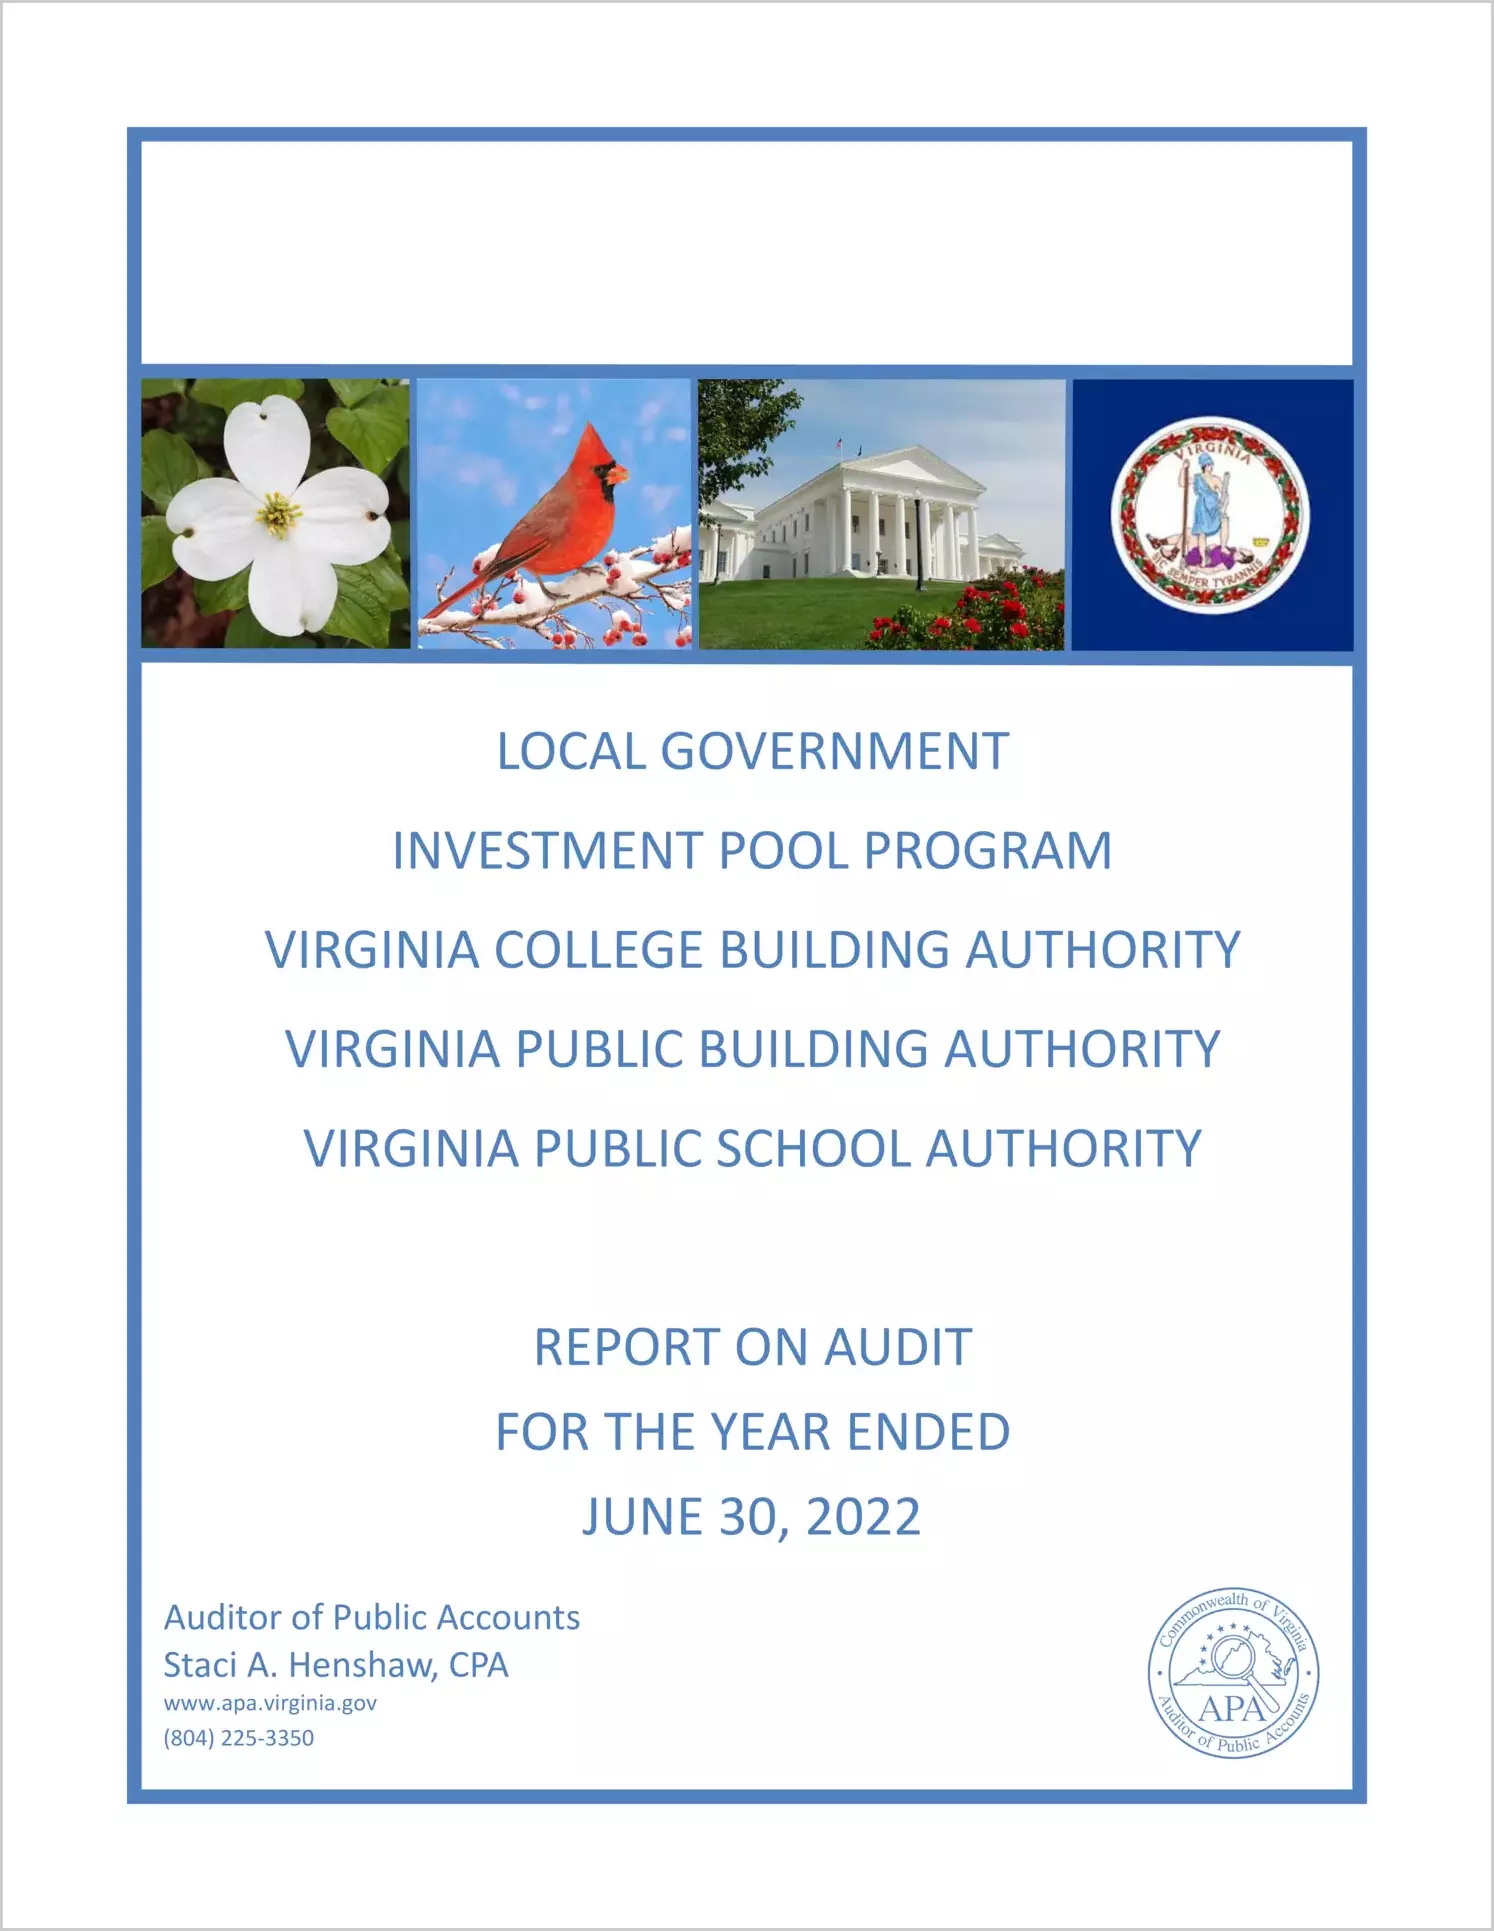 Local Government Investment Pool Program, Virginia College Building Authority, Virginia Public Building Authority, Virginia Public School Authority for they year ended June 30, 2022